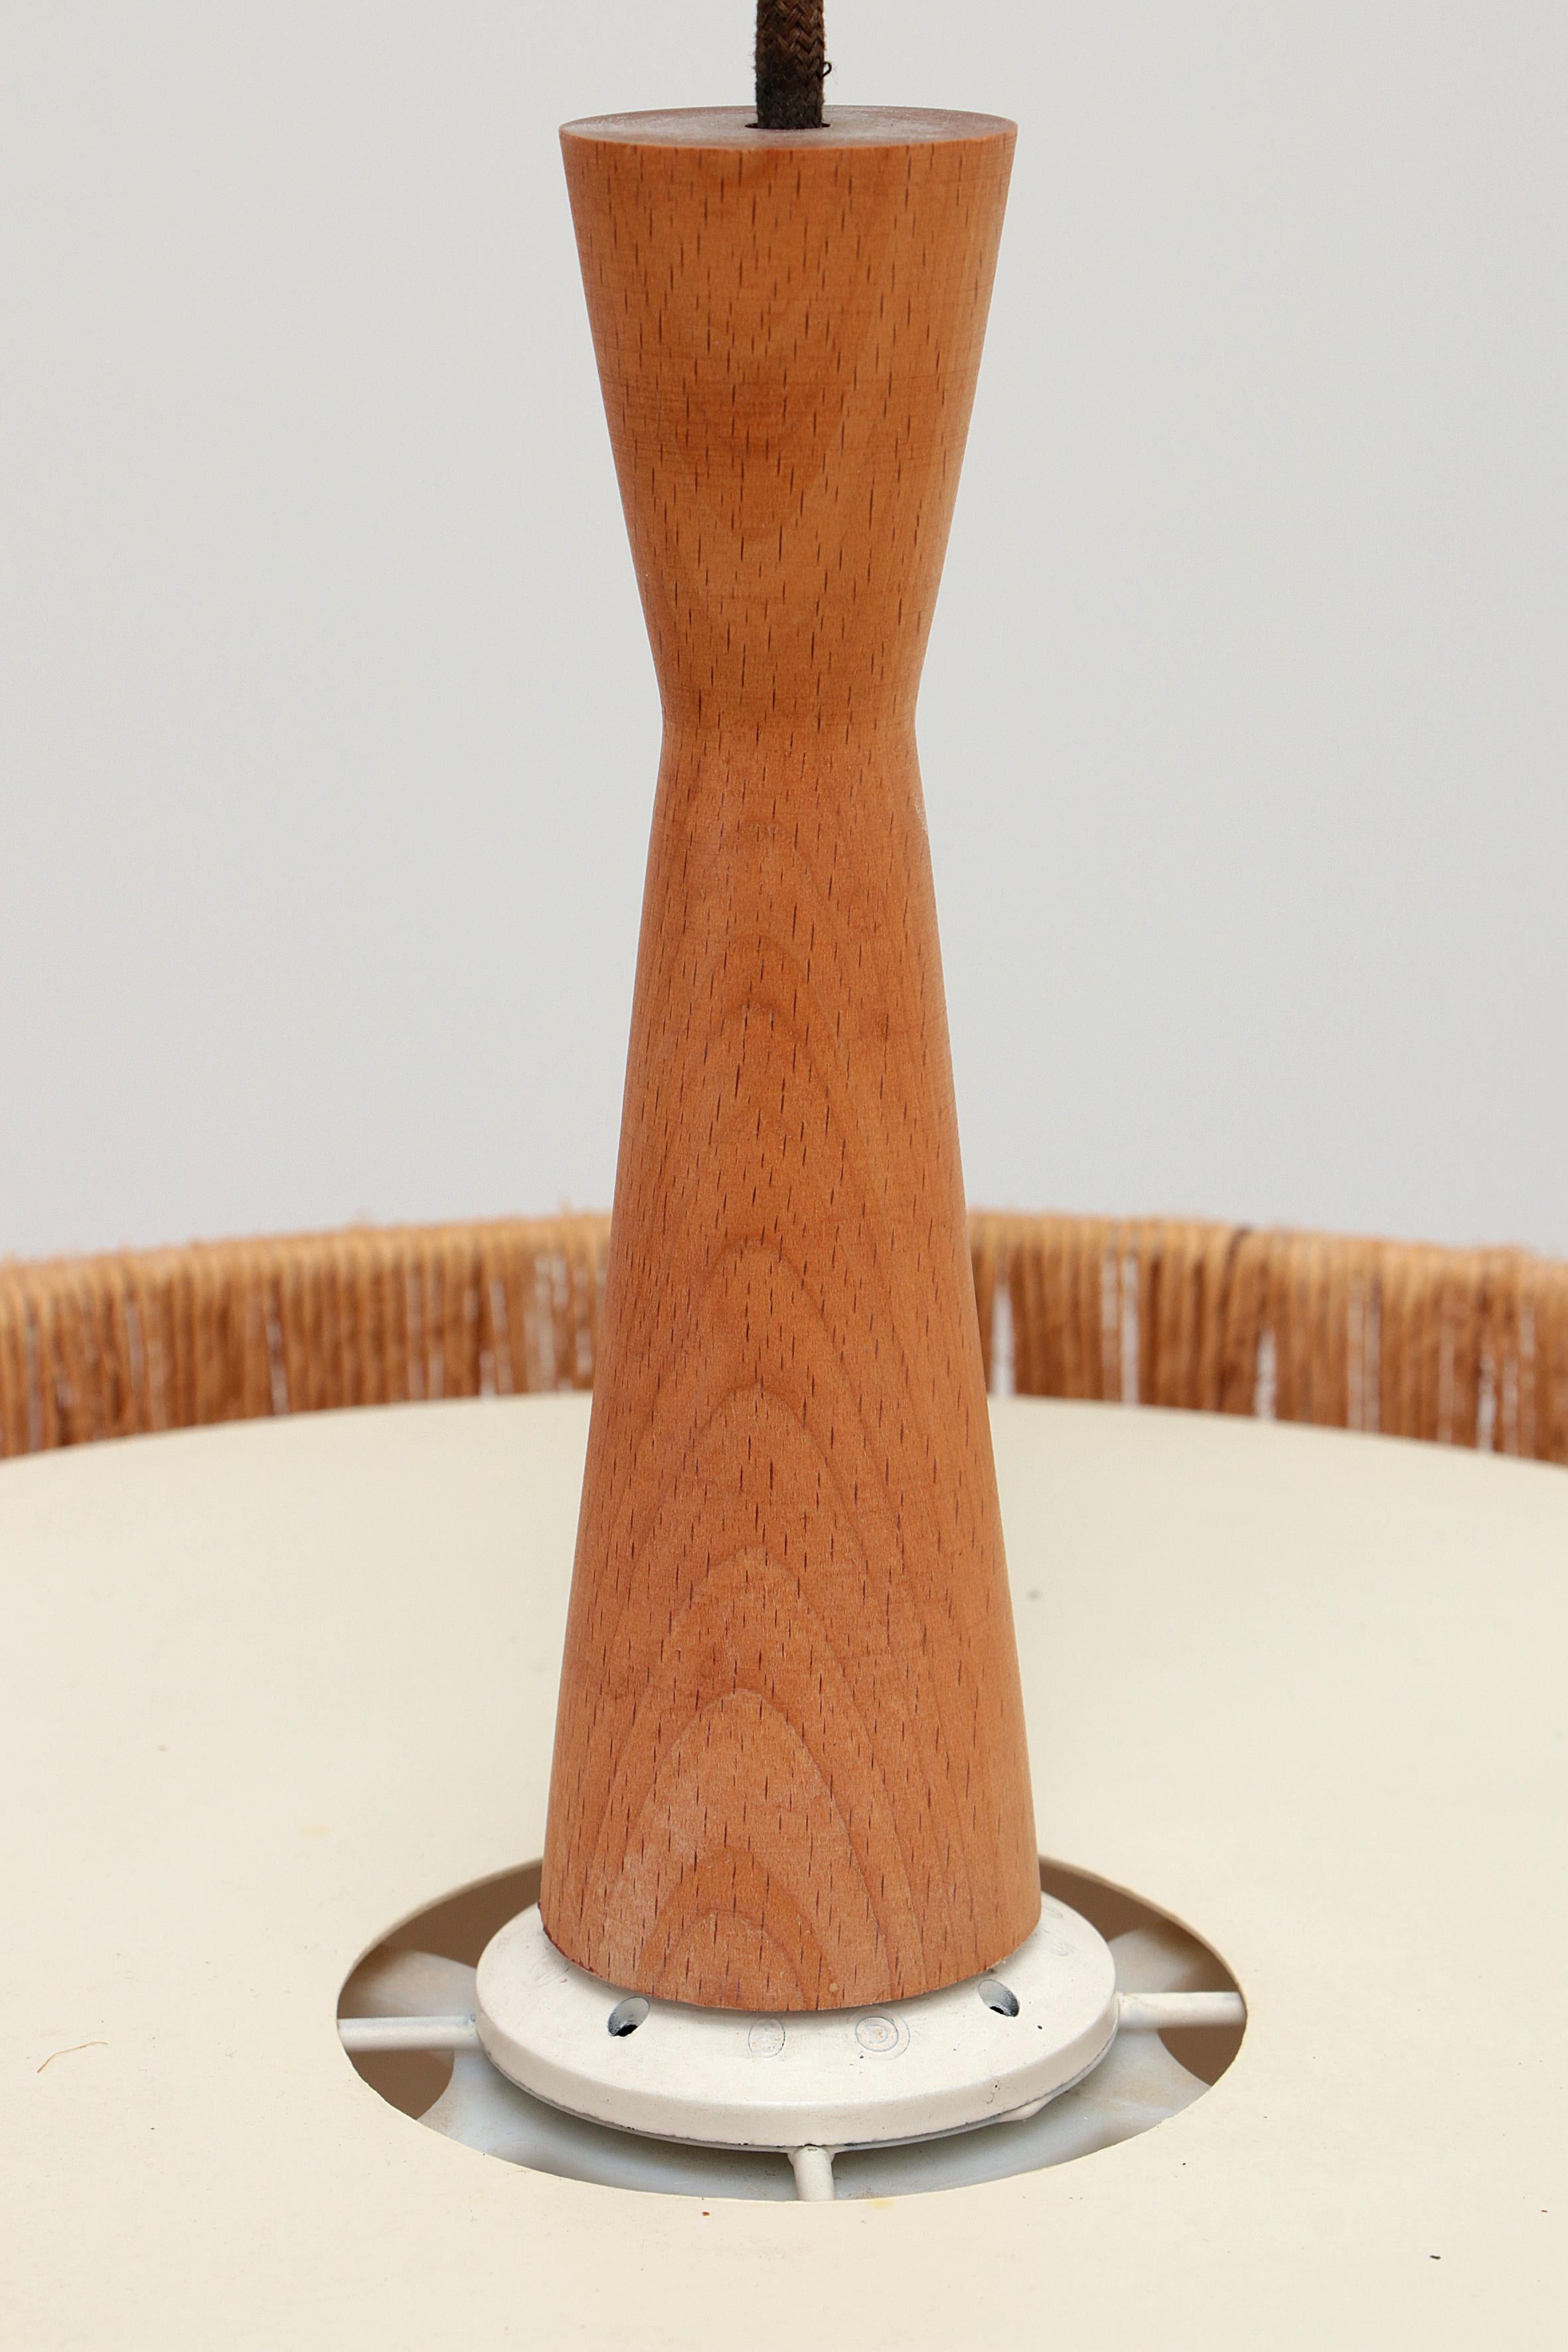 Vintage Temde Hanging Lamp with Teak and Raffia 1960s Germany For Sale 7